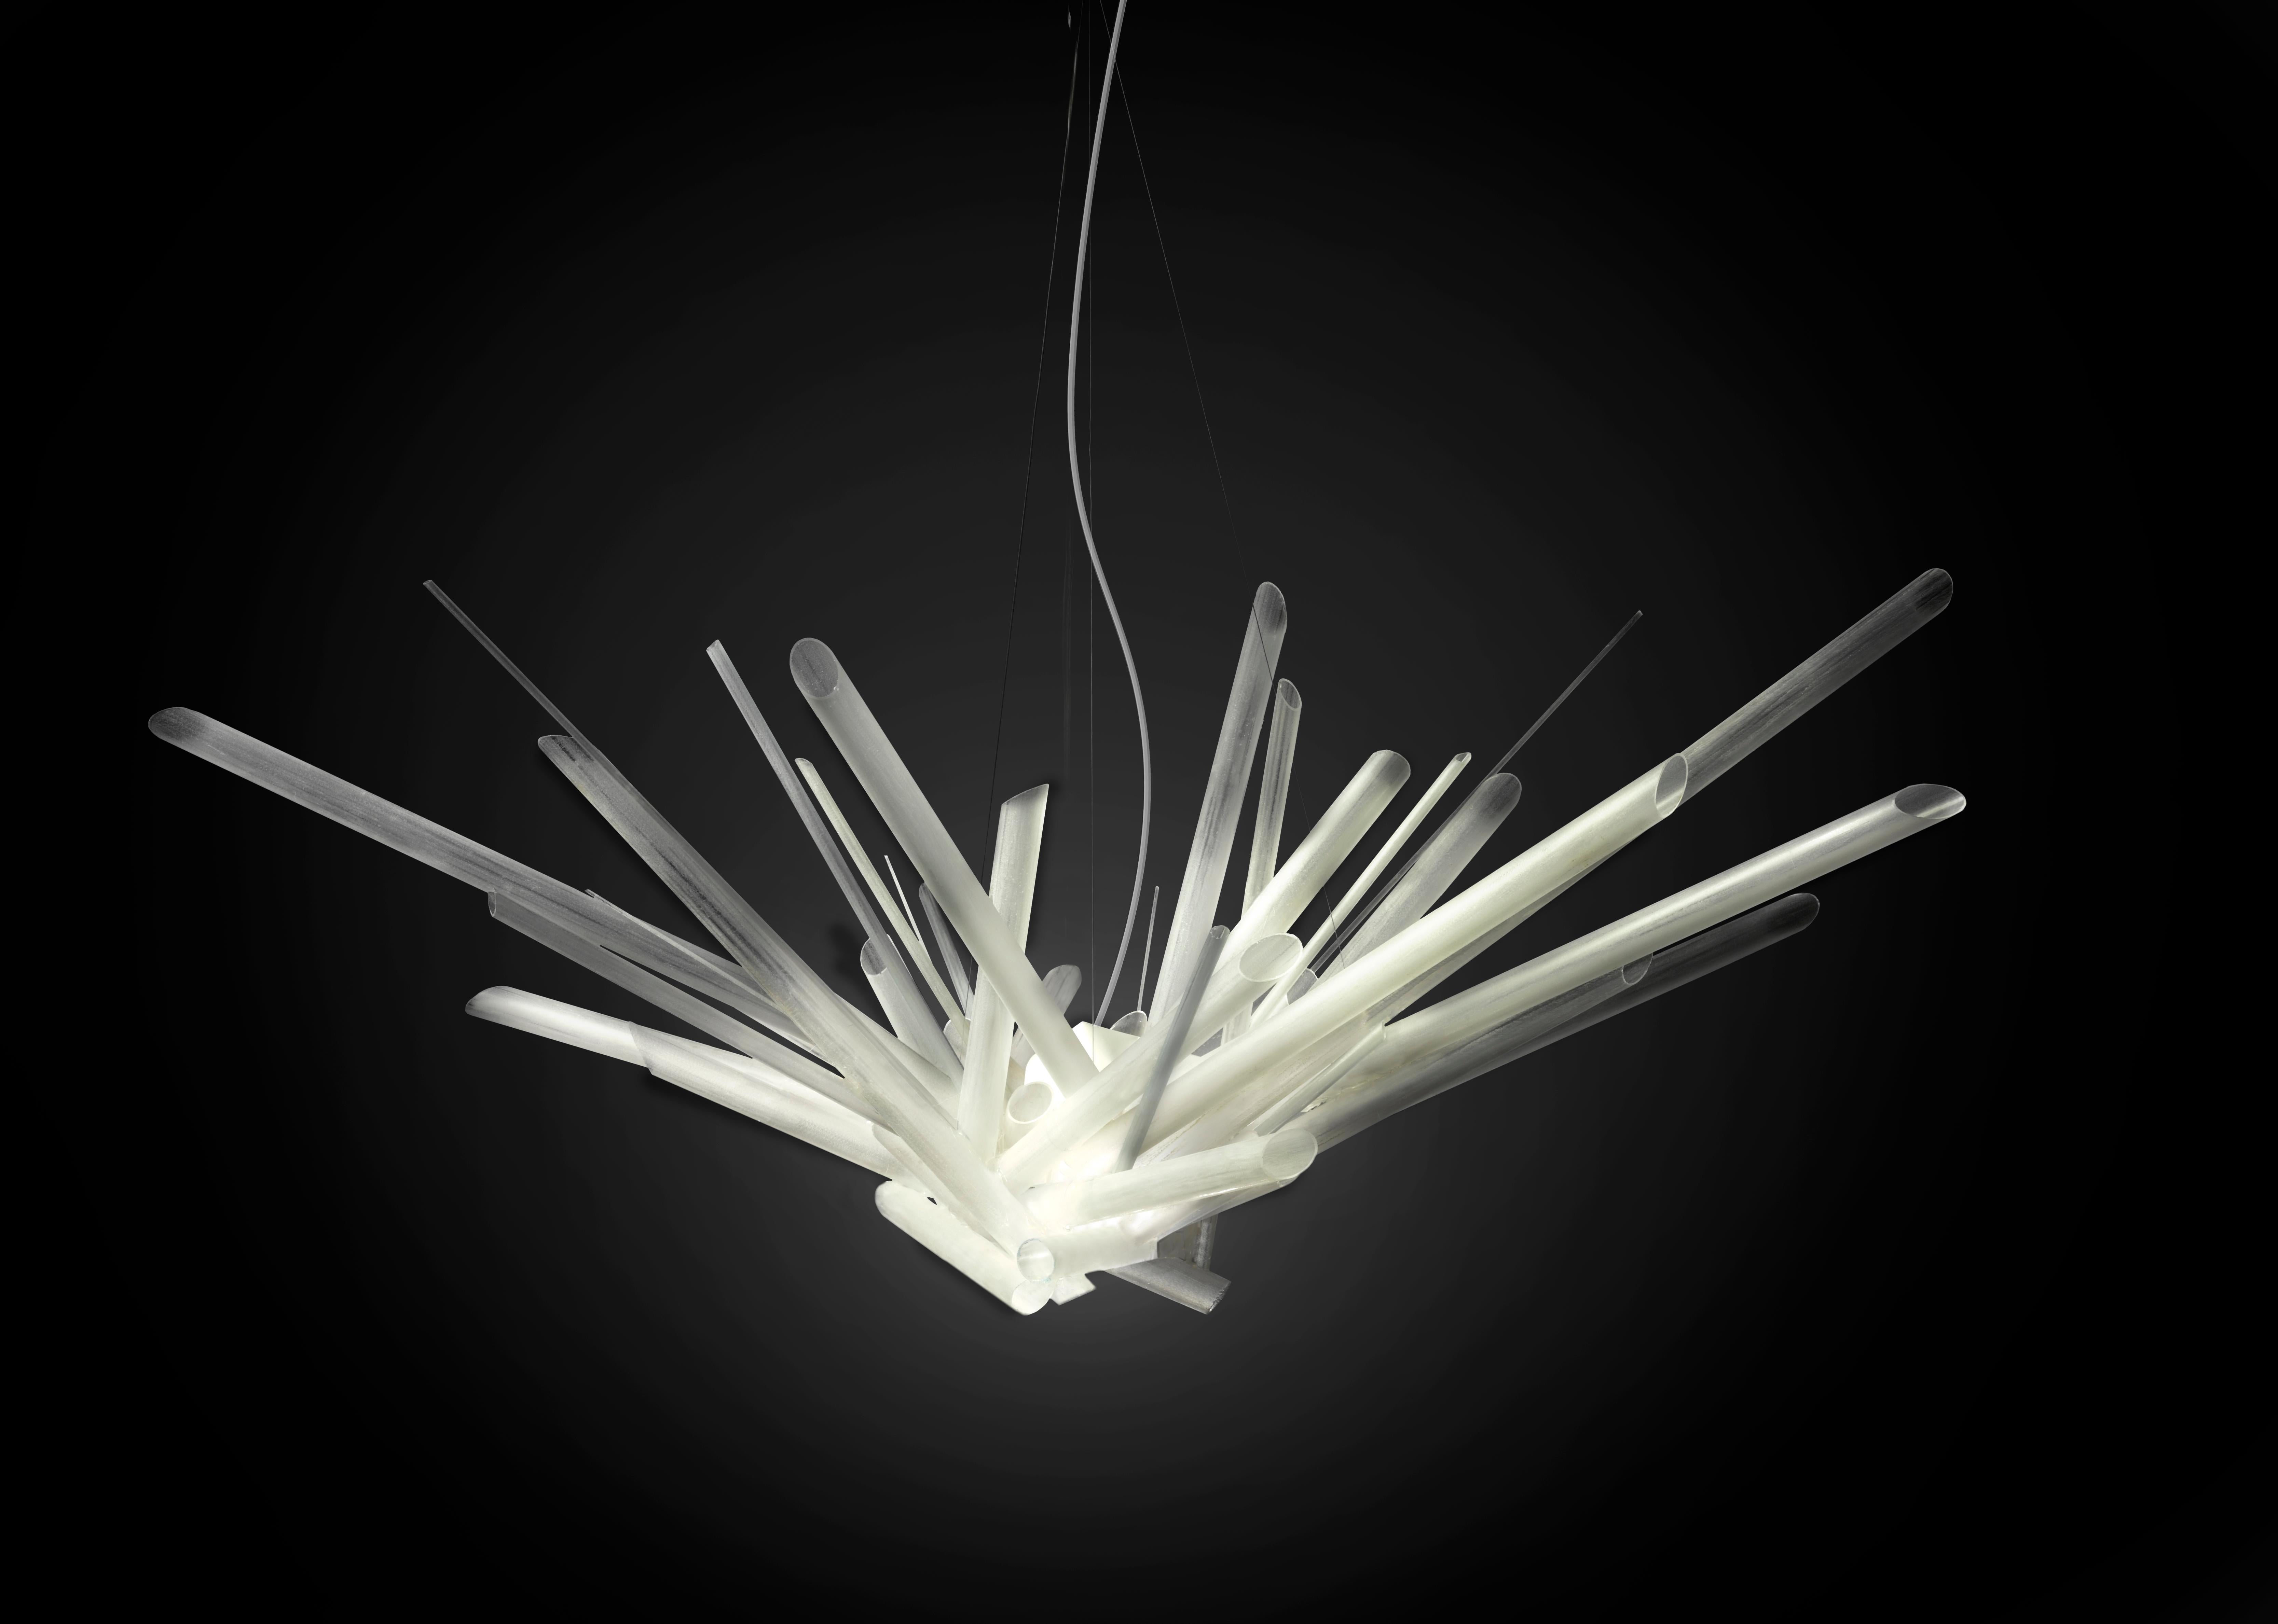 Boro Boro chandelier by Neal Aronowitz Design
Dimensions: Ø 132 x H 61 cm.
Materials: Borosilicate glass tubes and rods, stainless steel suspension, dimmable xenon halogen bulbs.
One of a kind.
All our lamps can be wired according to each